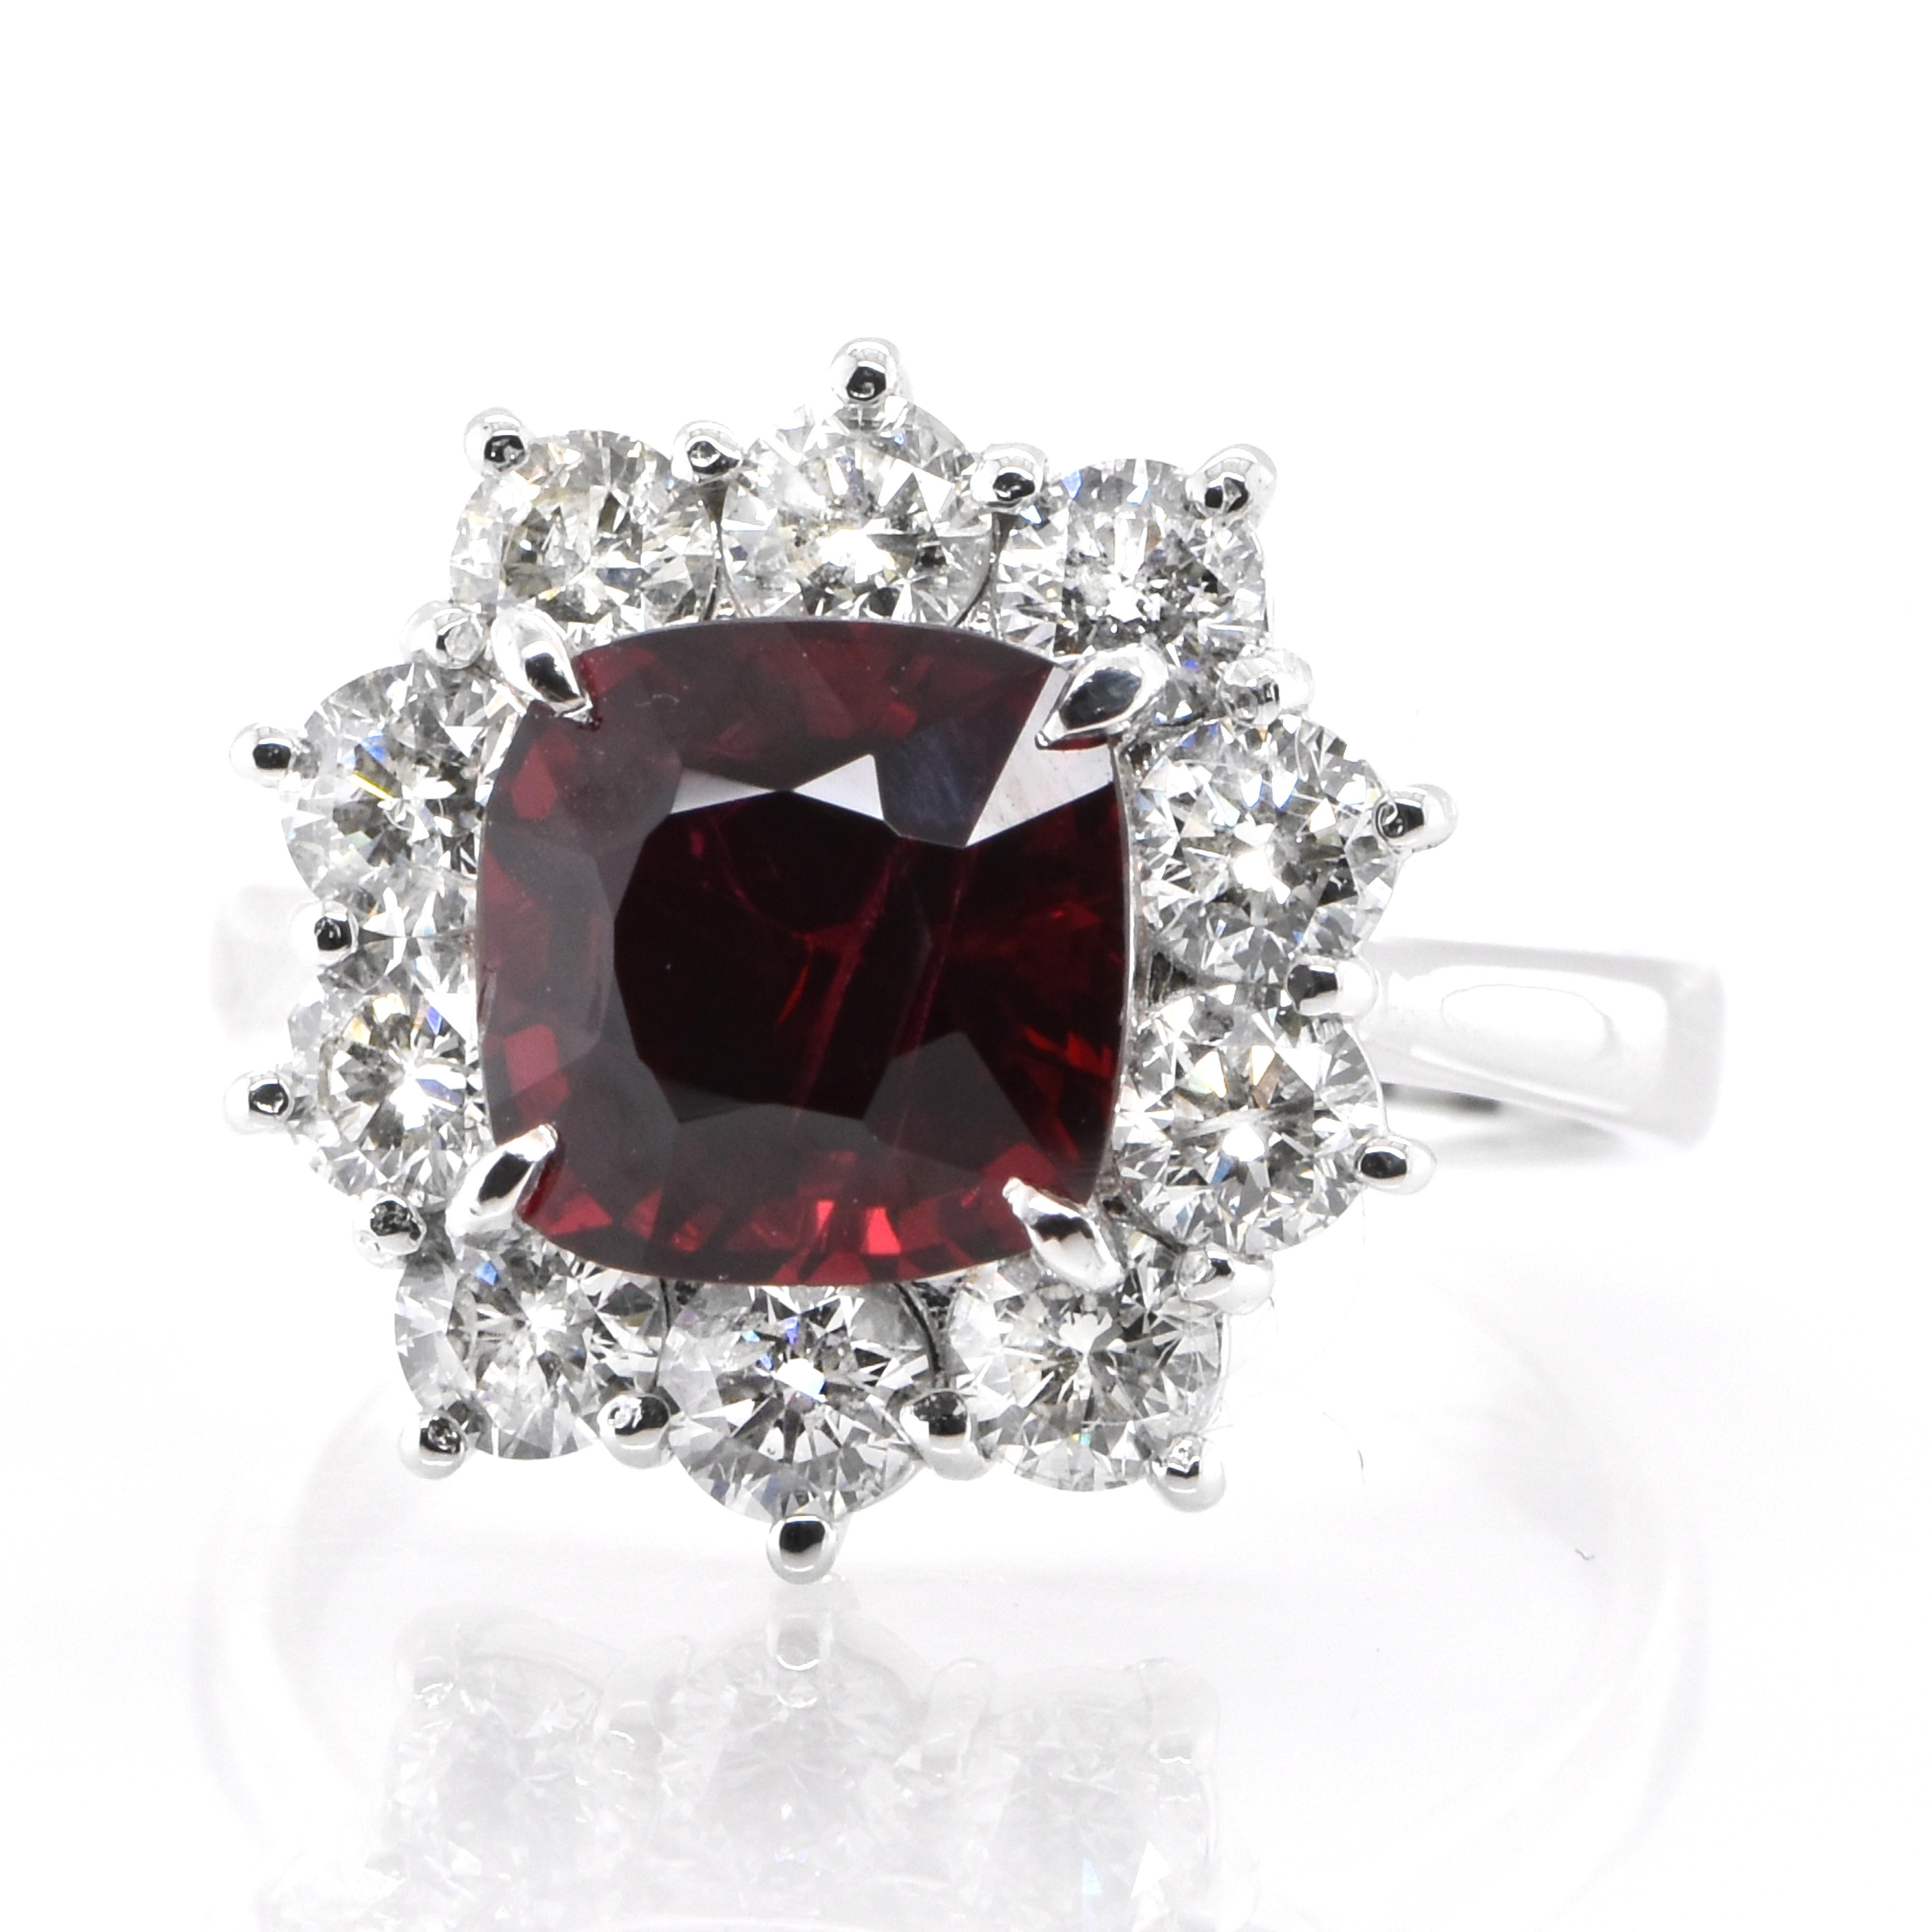 A beautiful halo ring featuring a GIA Certified 3.11 Carat Natural, No Heat, Burmese Red Spinel and 1.33 Carats of Diamond Accents set in Platinum. Spinel has been frequently confused with ruby, but it’s a gem that can stand on its own merits. Many